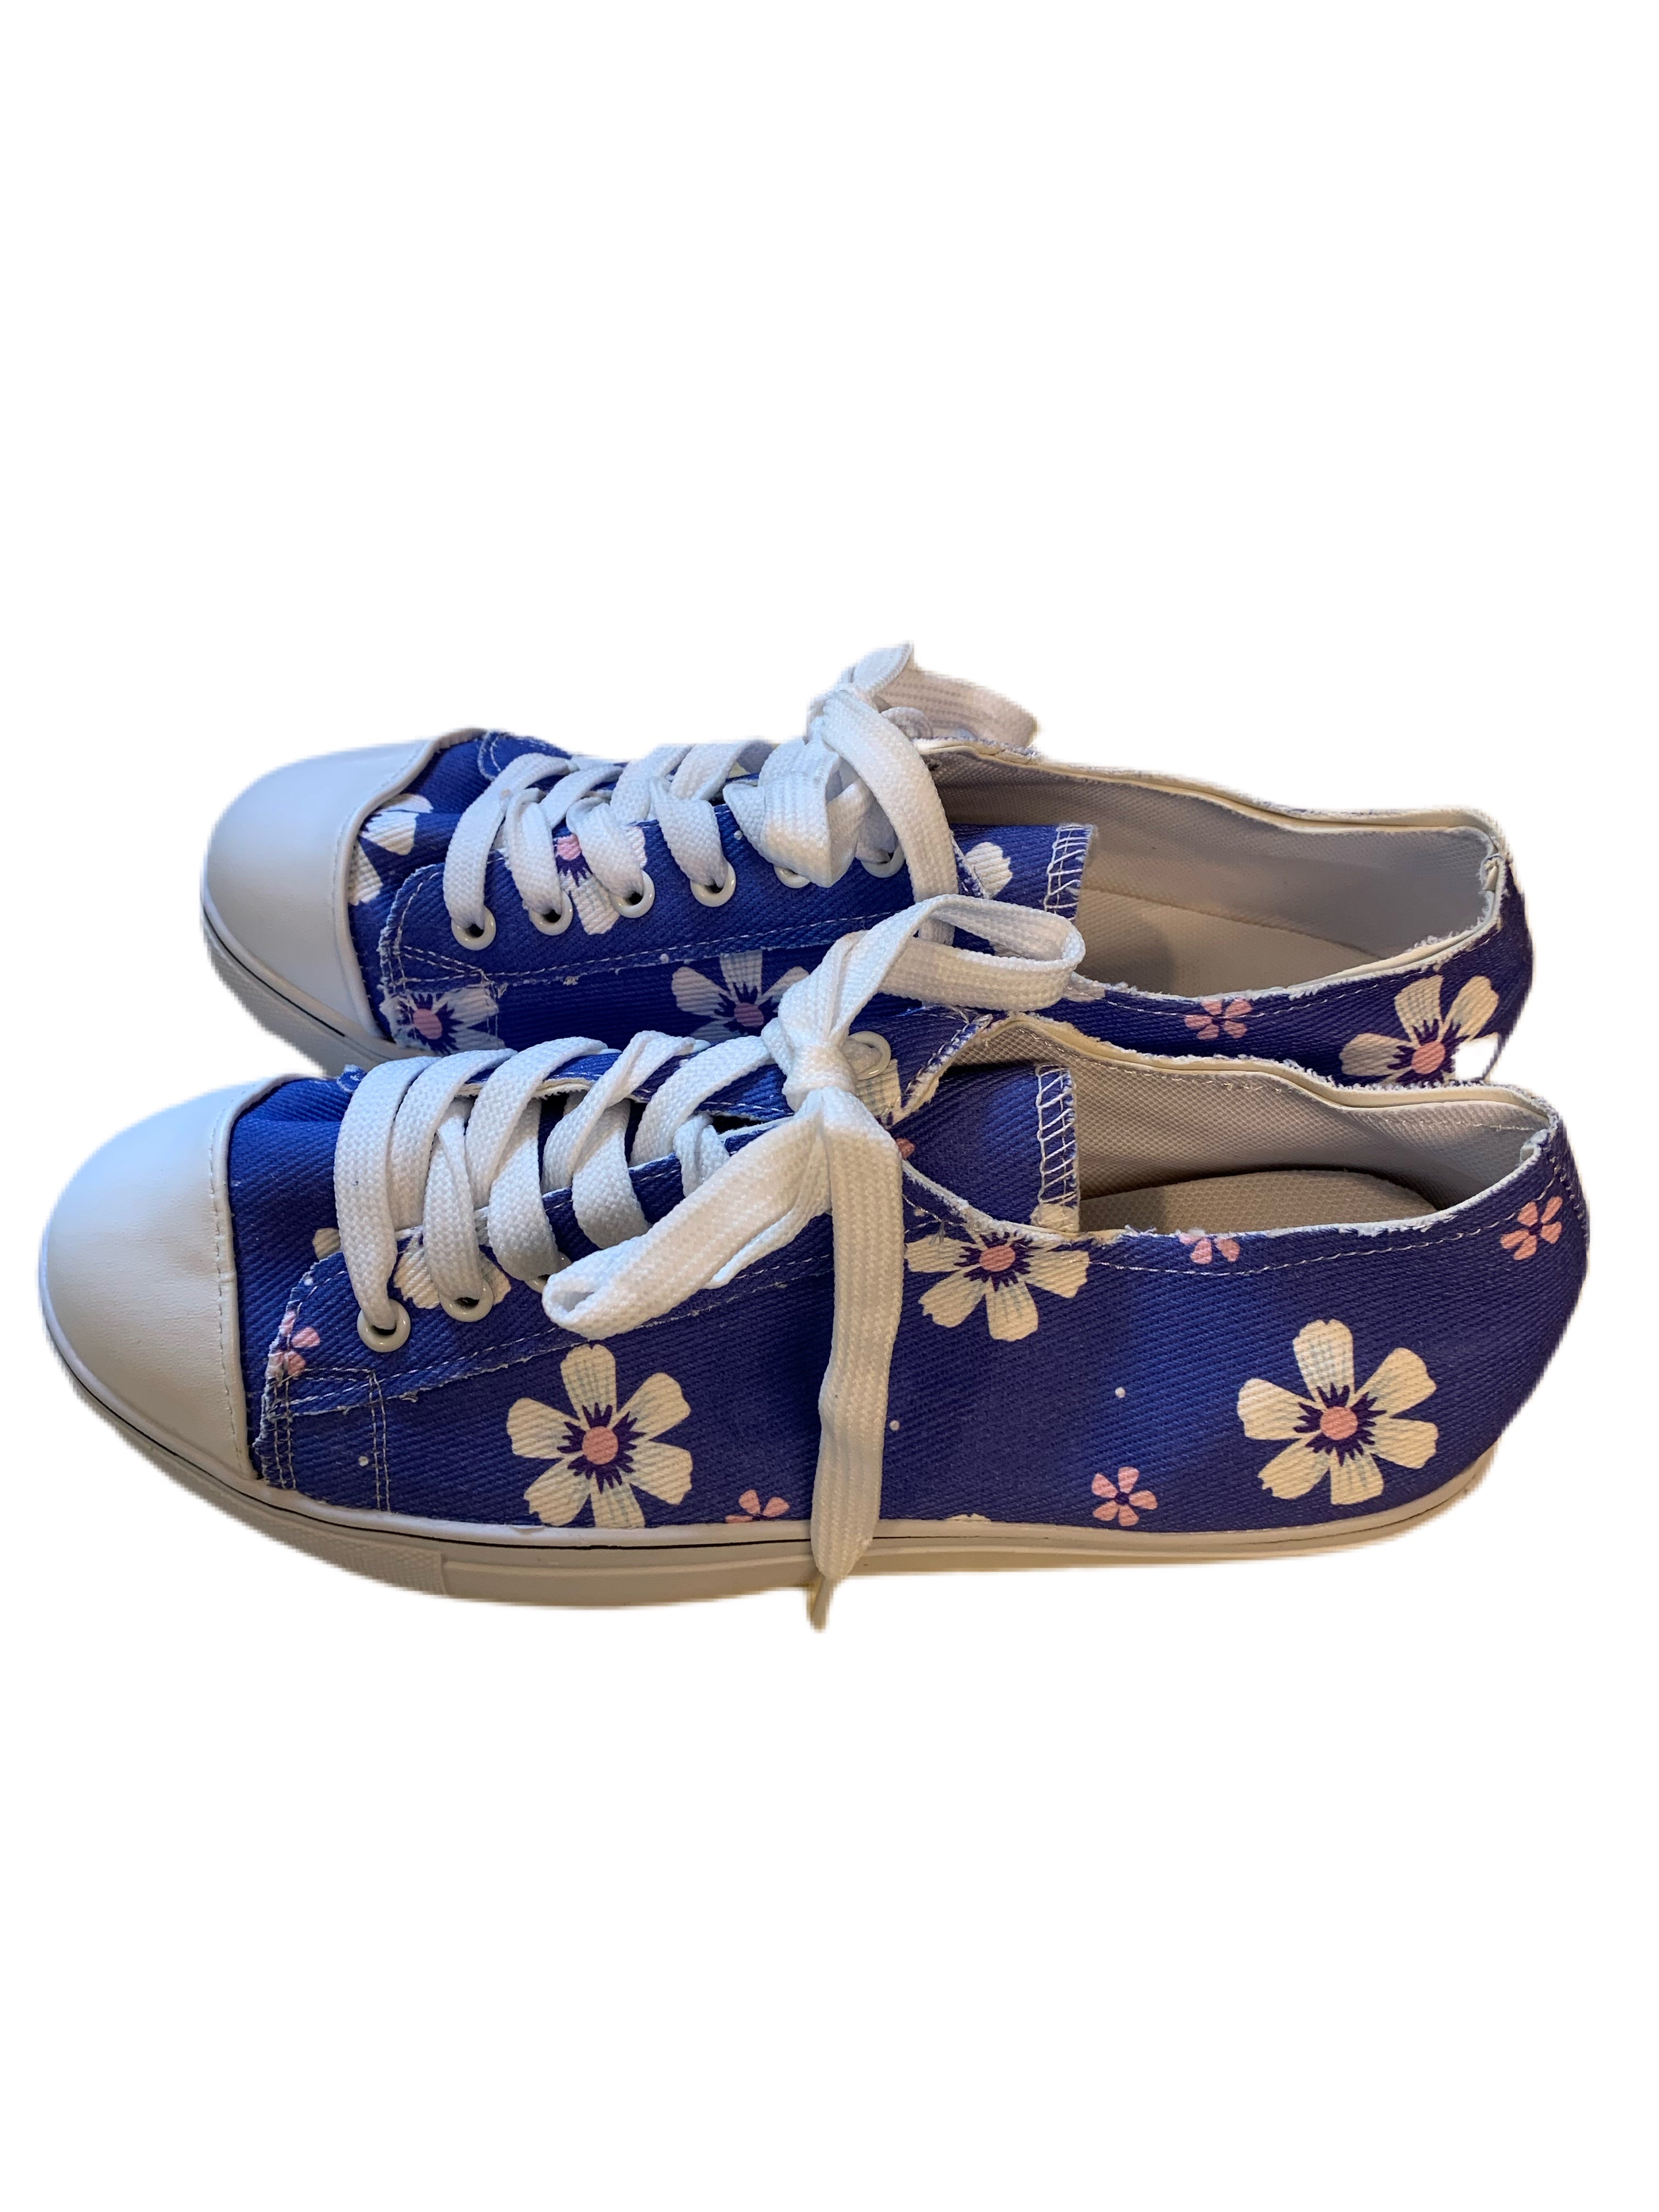 Periwinkle Daisy Canvas Sneakers